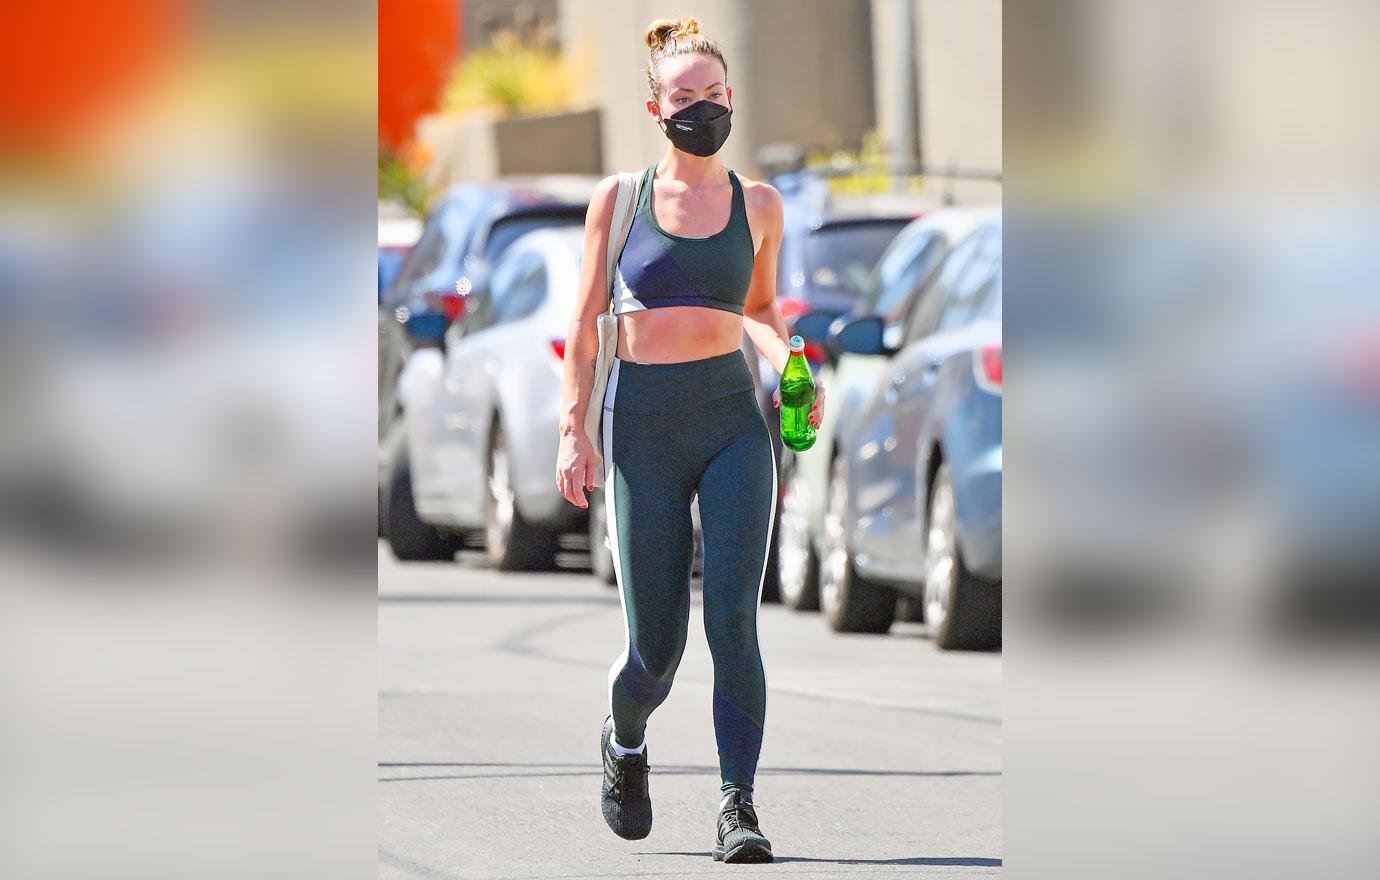 Olivia Wilde Leaves The Gym In Purple Leggings And A Low-Cut